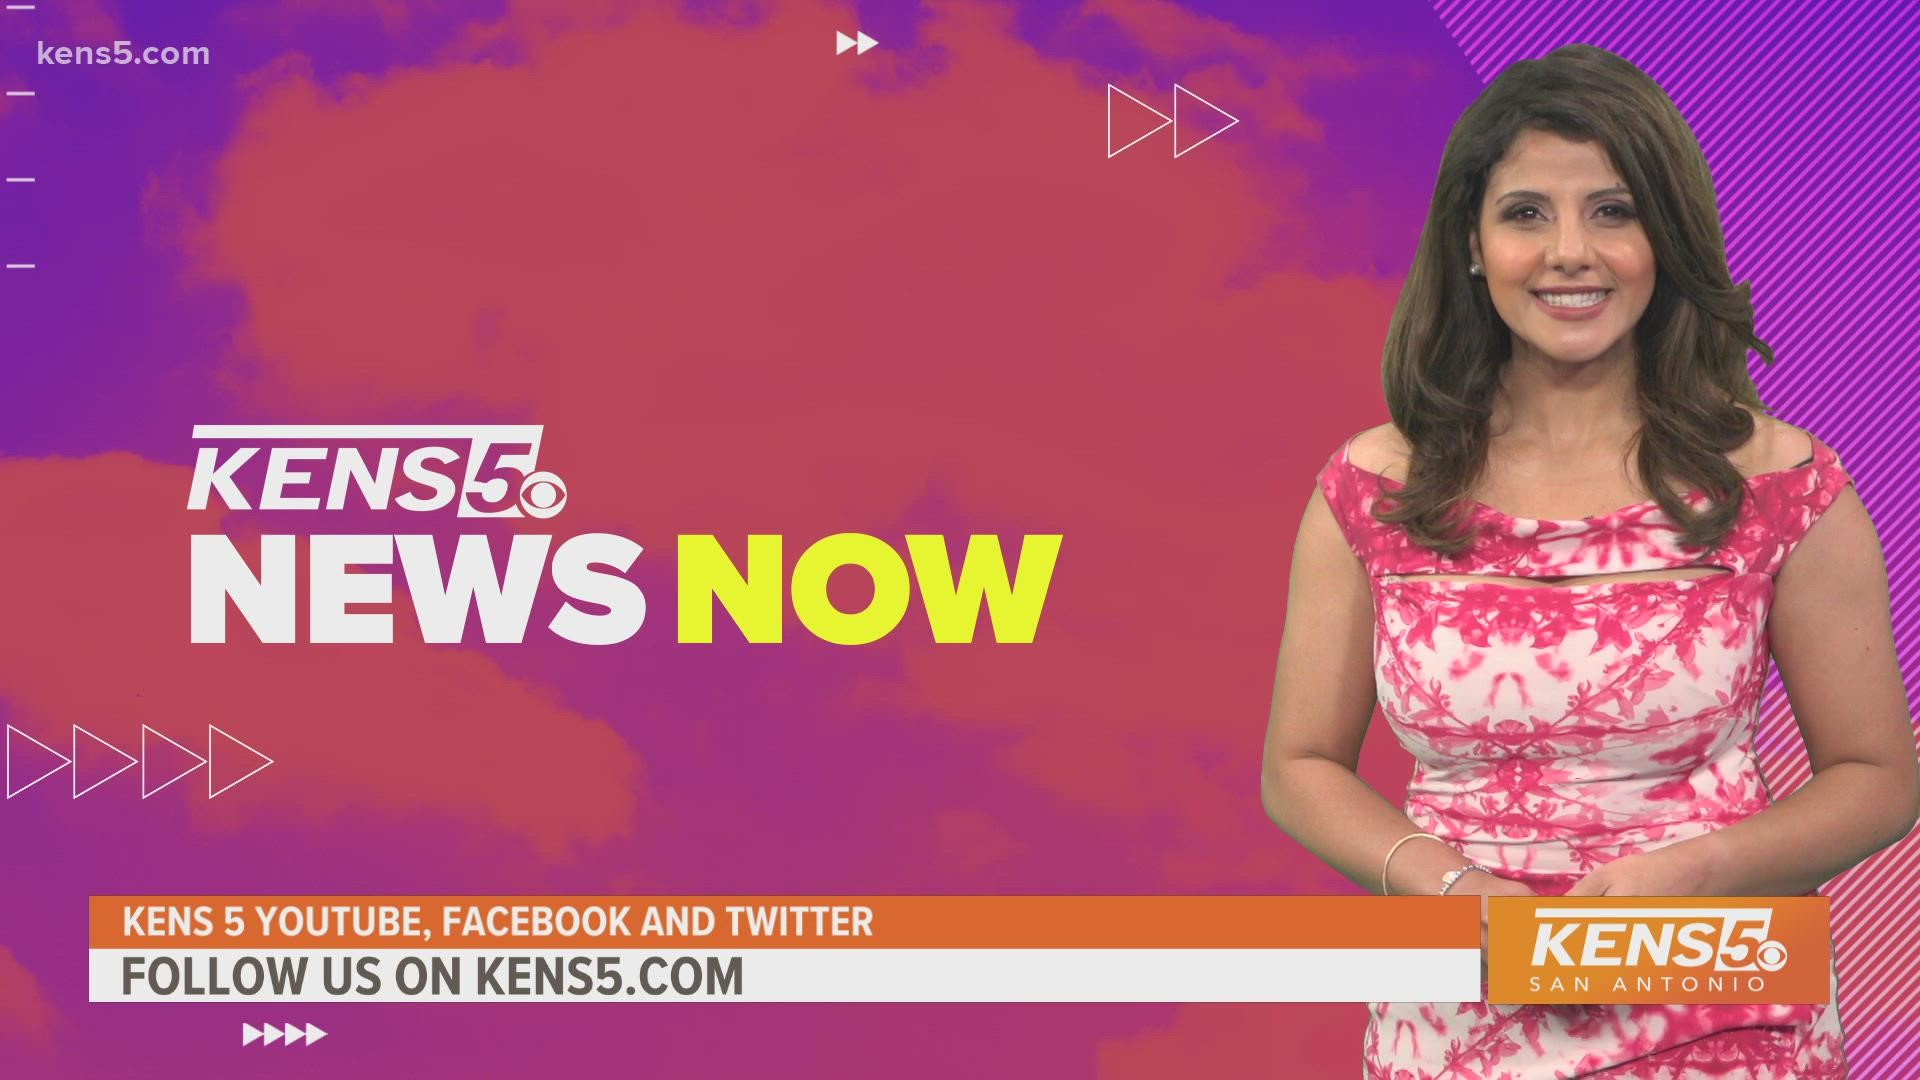 Follow us here to get the latest top headlines with KENS 5's Sarah Forgany every weekday.